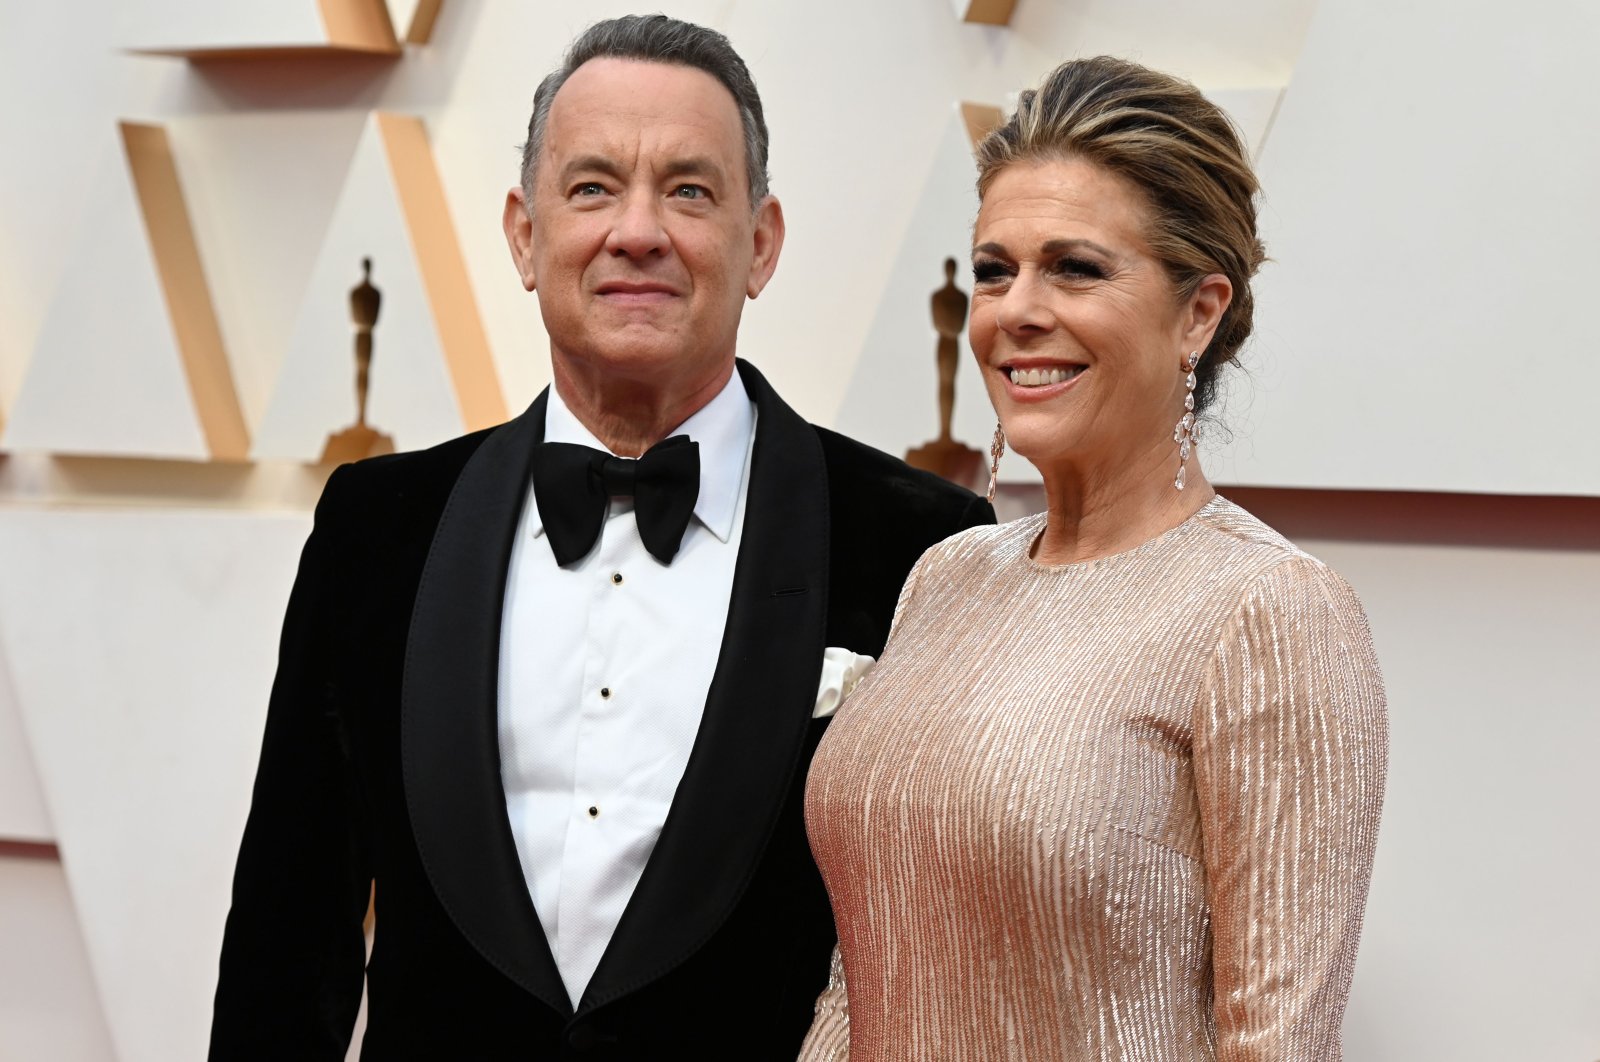 In this file photo taken on Feb. 9, 2020, U.S. actor Tom Hanks and wife Rita Wilson arrive for the 92nd Oscars at the Dolby Theatre in Hollywood, California. (AFP Photo)